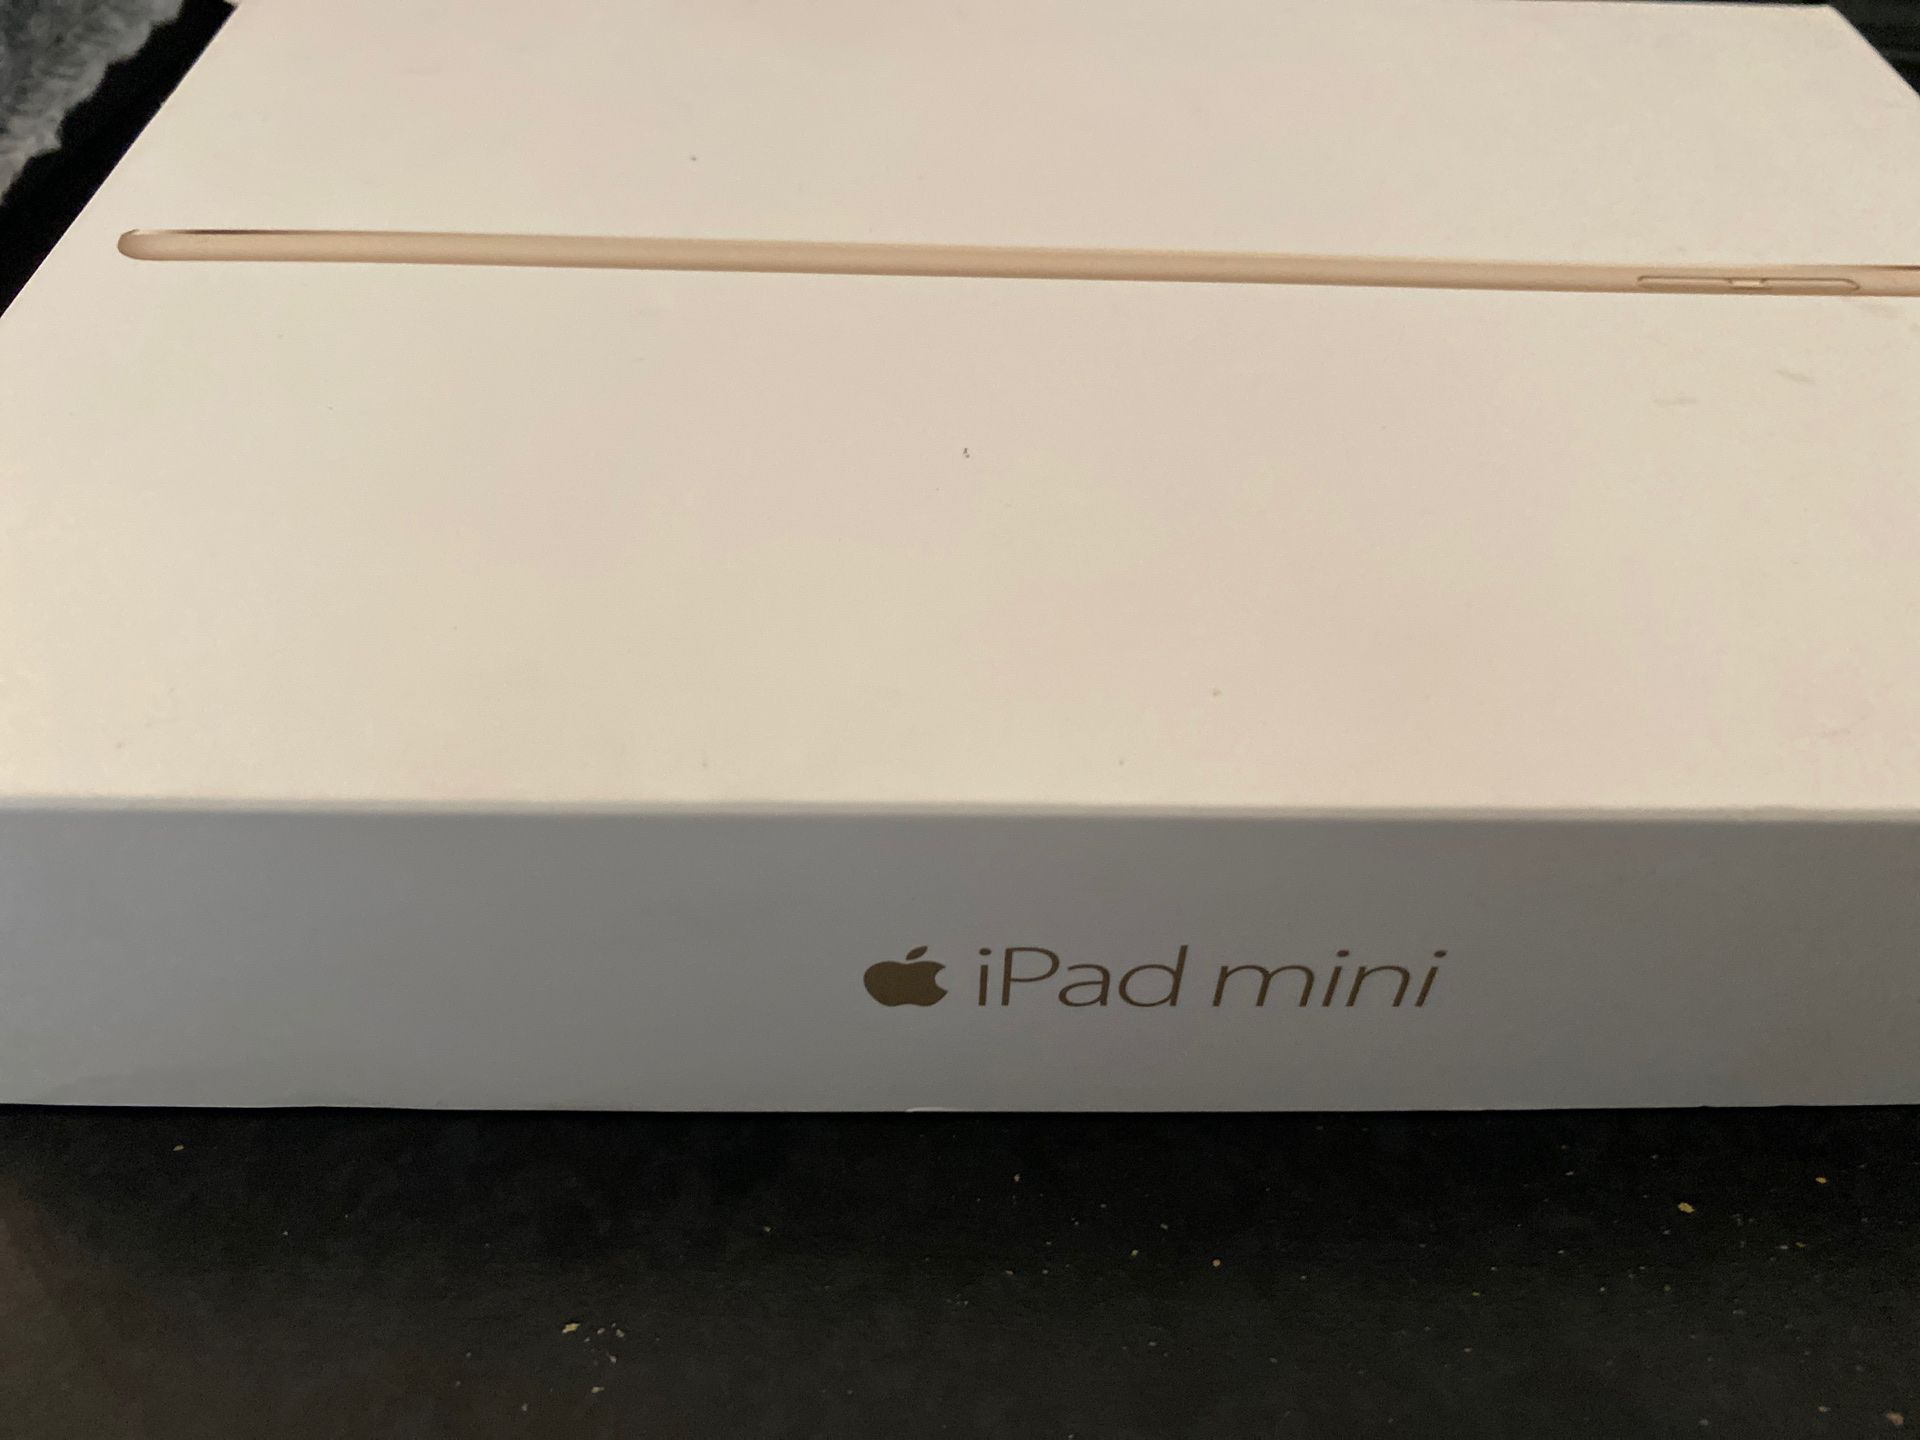 iPad mini 1 WiFi 16gb in excellent condition comes with original box + cable +power adapter